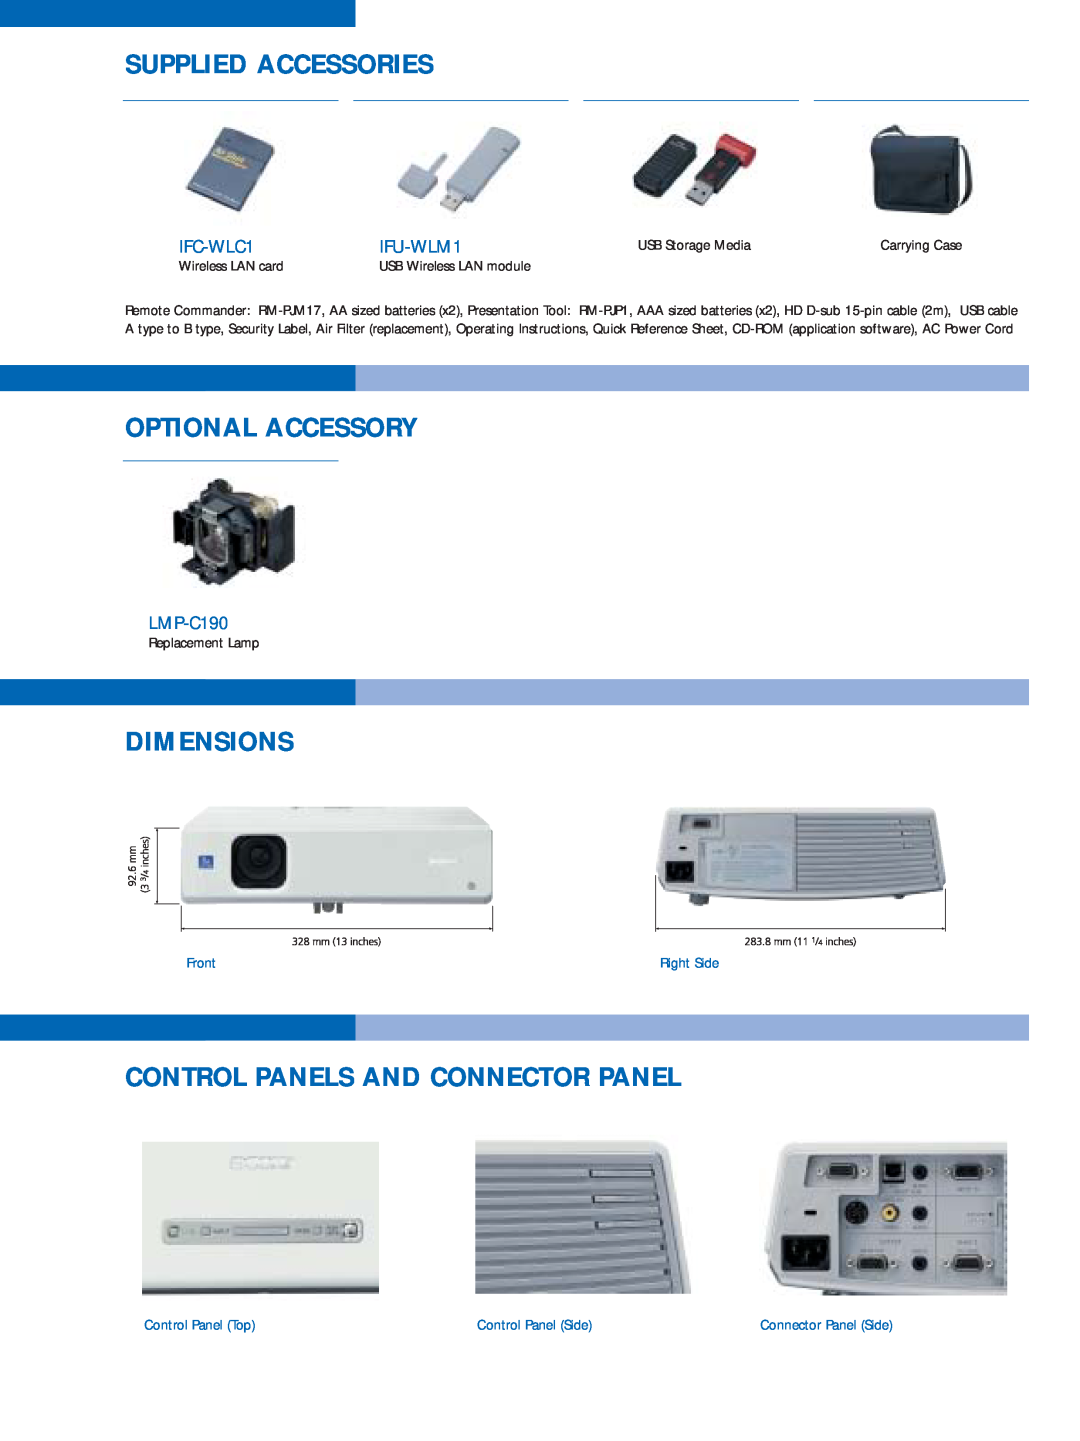 Sony VPL-CX85 Supplied Accessories, Optional Accessory, Dimensions, Control Panels And Connector Panel, IFC-WLC1, IFU-WLM1 